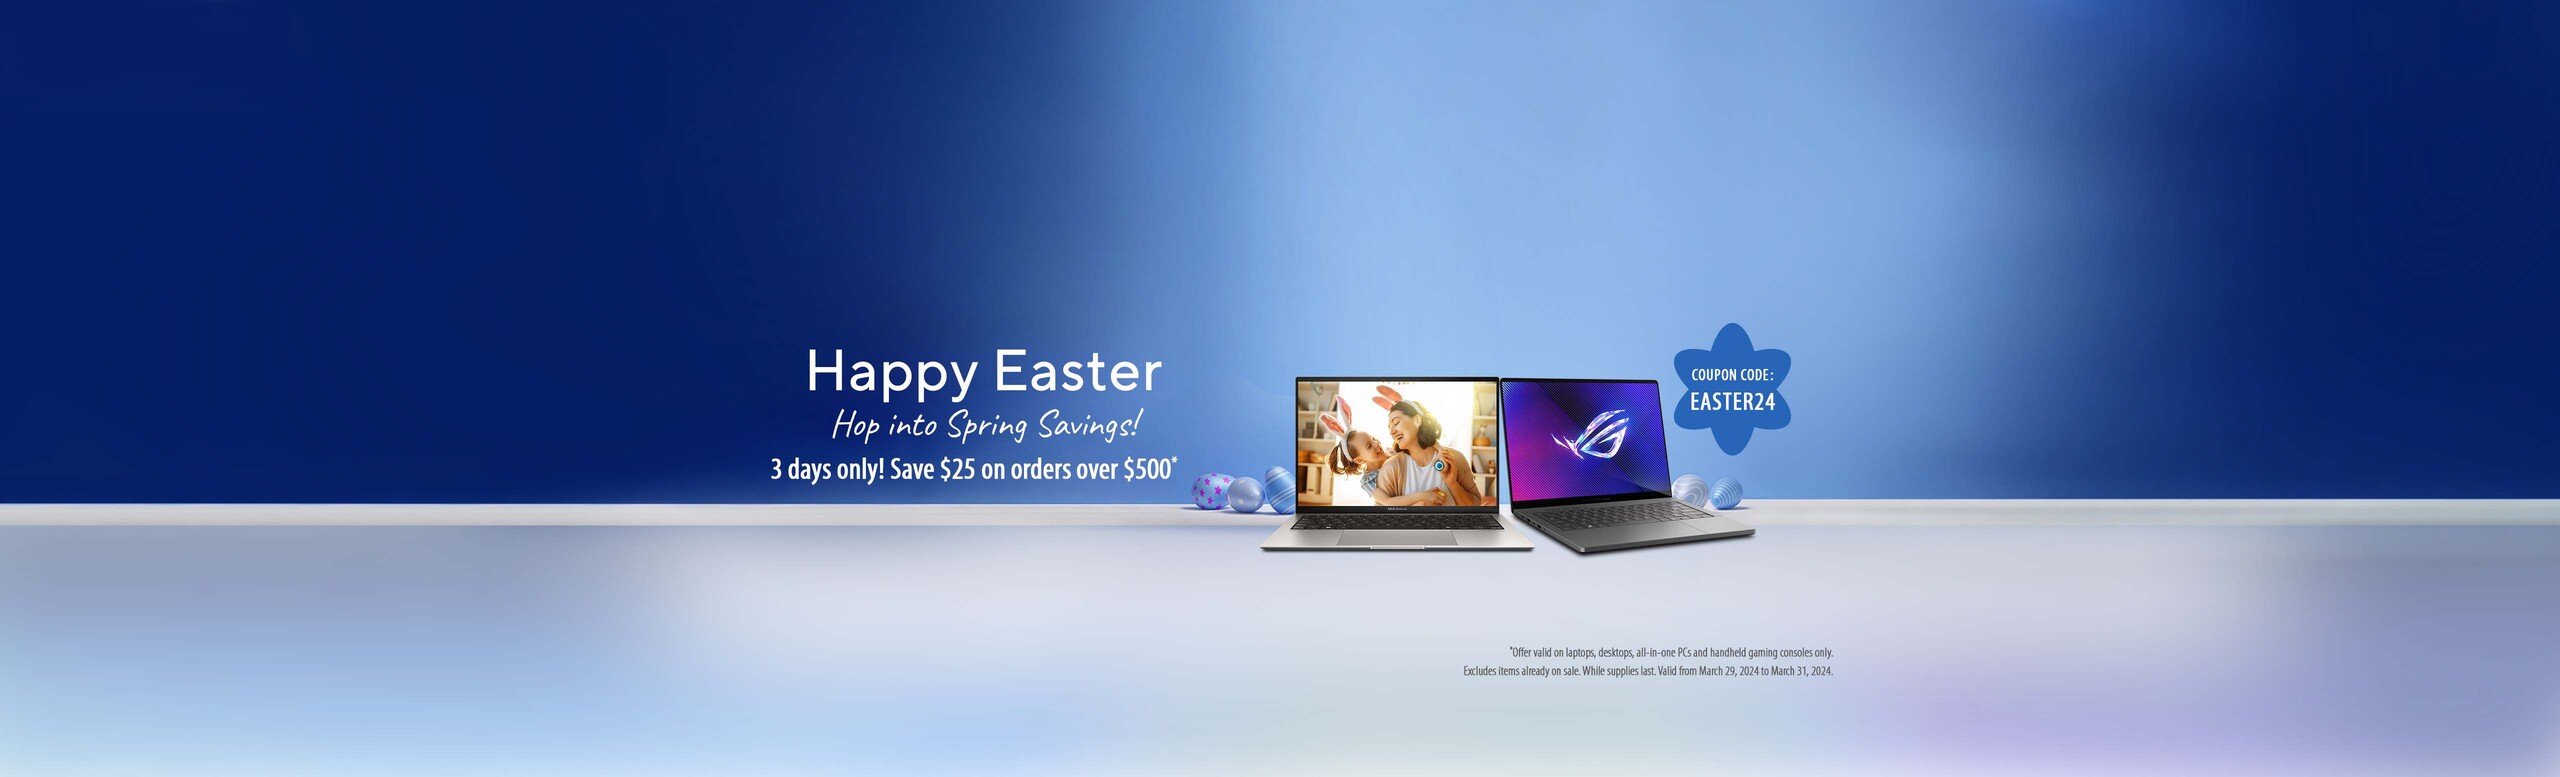 Happy Easter Hop into Spring Savings! 3 days only!  Save $25 on orders over $500 *Offer valid on laptops, desktops, all-in-one {Cs and handheld gaming consoles only  Excludes iteams already on while.  While supplies last.  Valid from March 29-31, 2021 Coupon Code EASTER24t